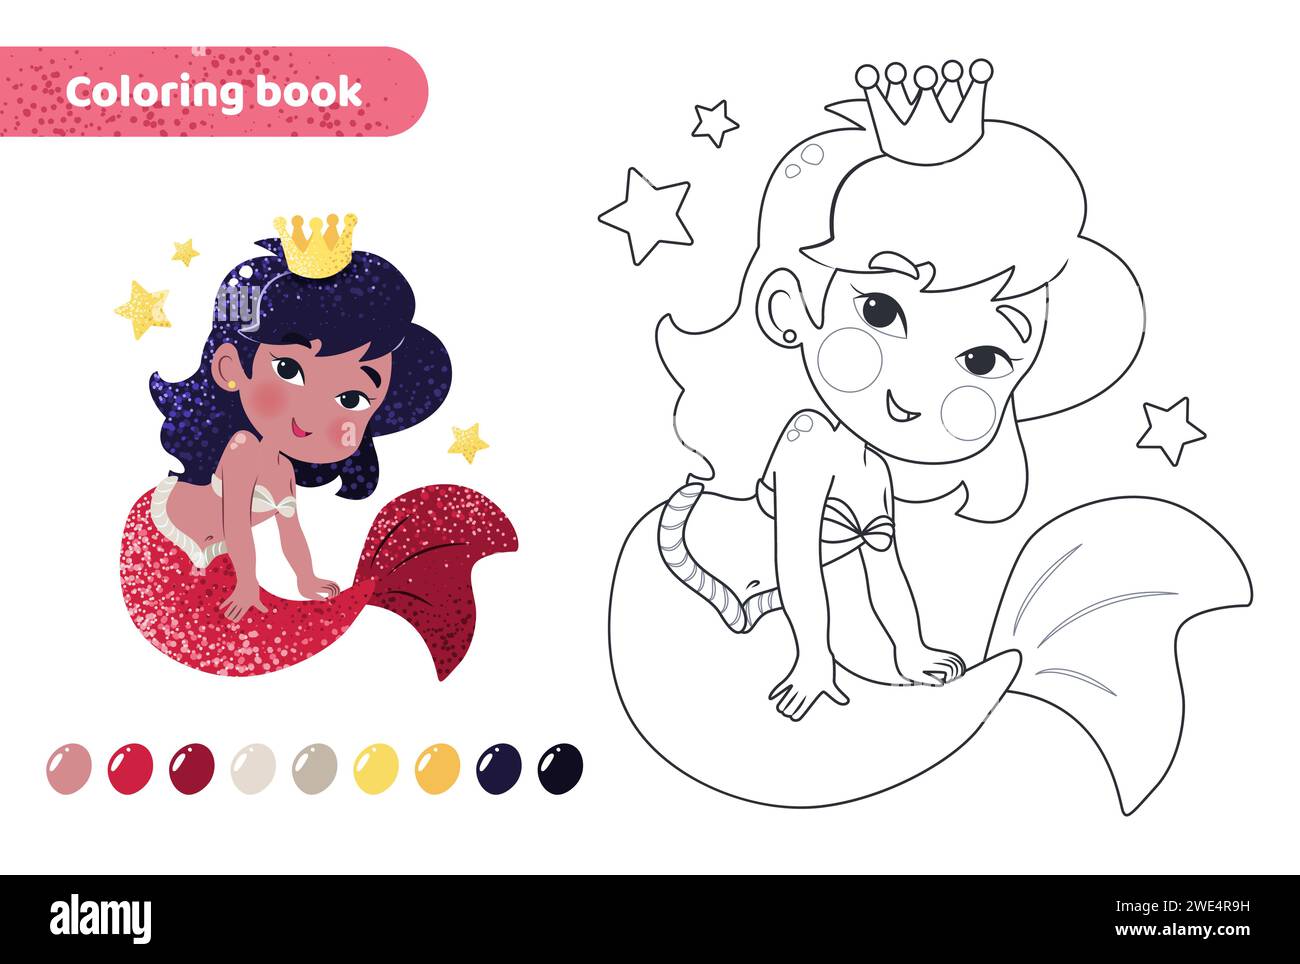 Coloring book for kids. Cute mermaid with crown. Stock Vector